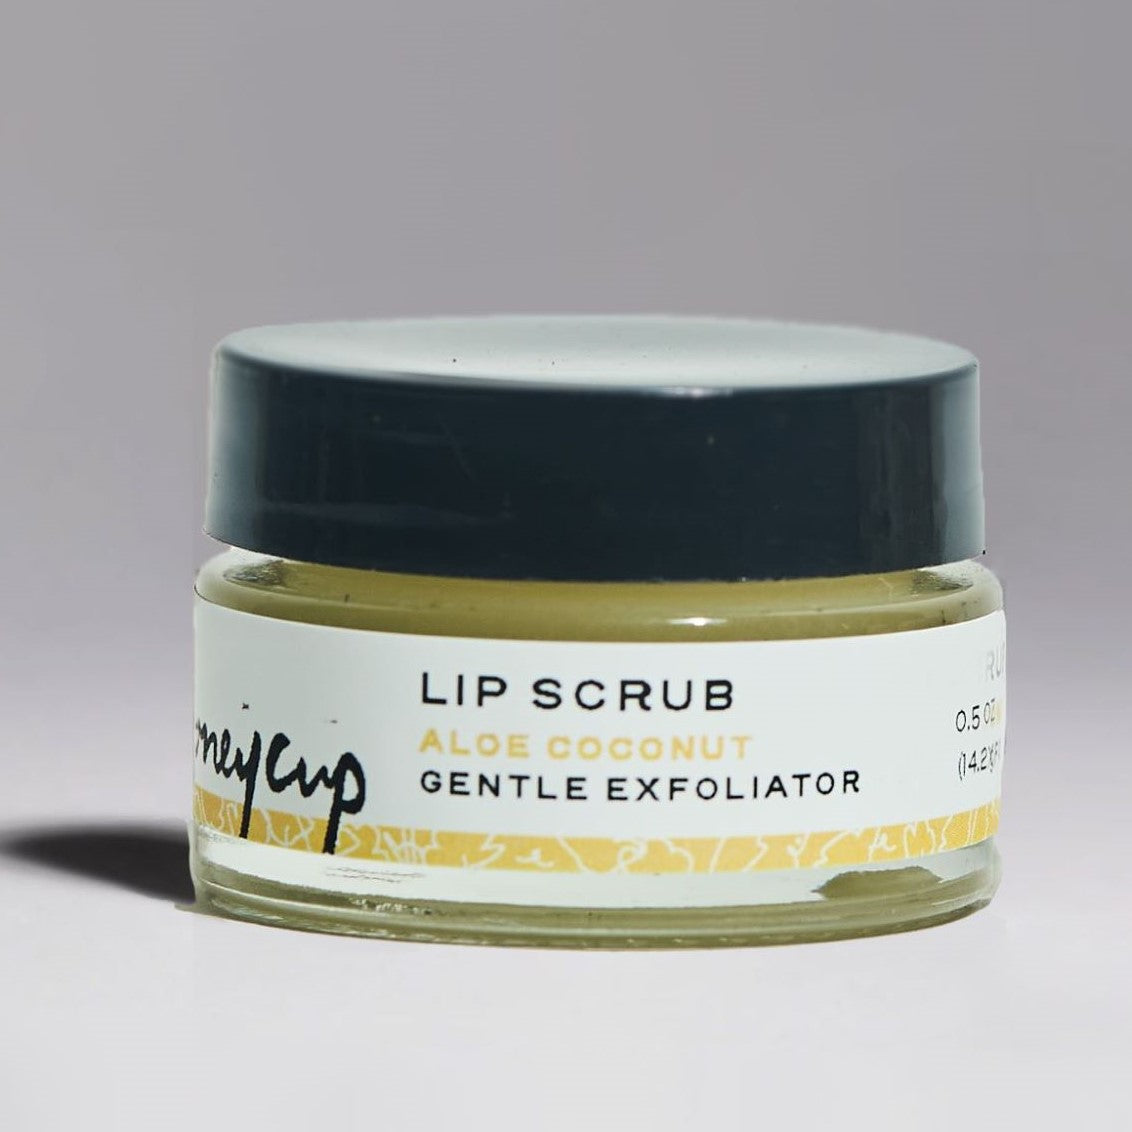 Lip scrub aloe coconut all natural skin care ingredients in recyclable jar